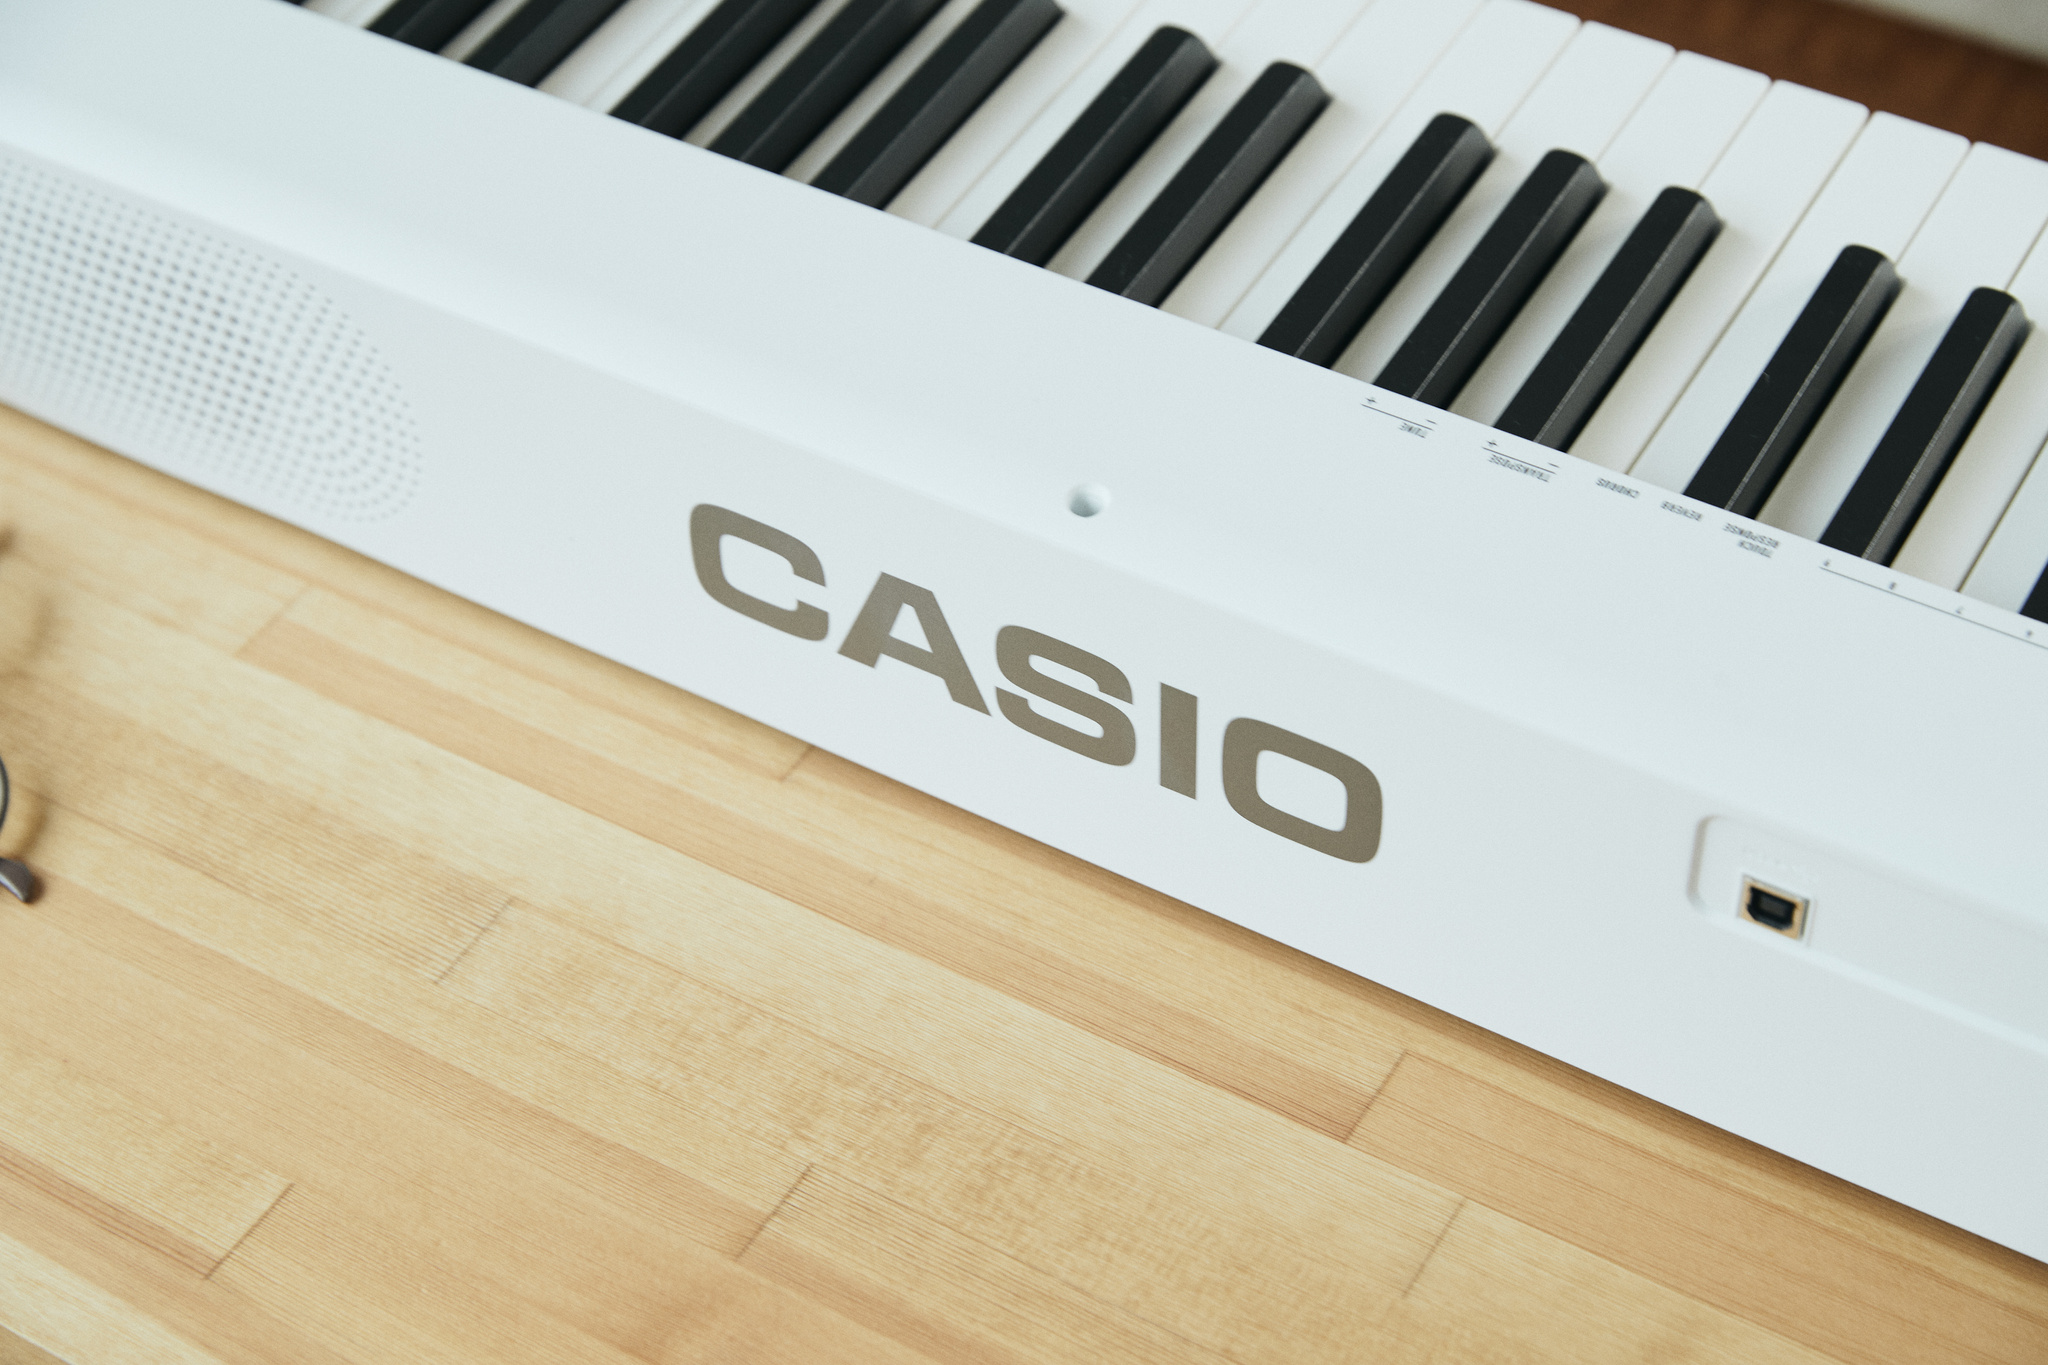 CASIO MUSIC UK LAUNCHES ALL NEW CDP-S DIGITAL PIANO SERIES